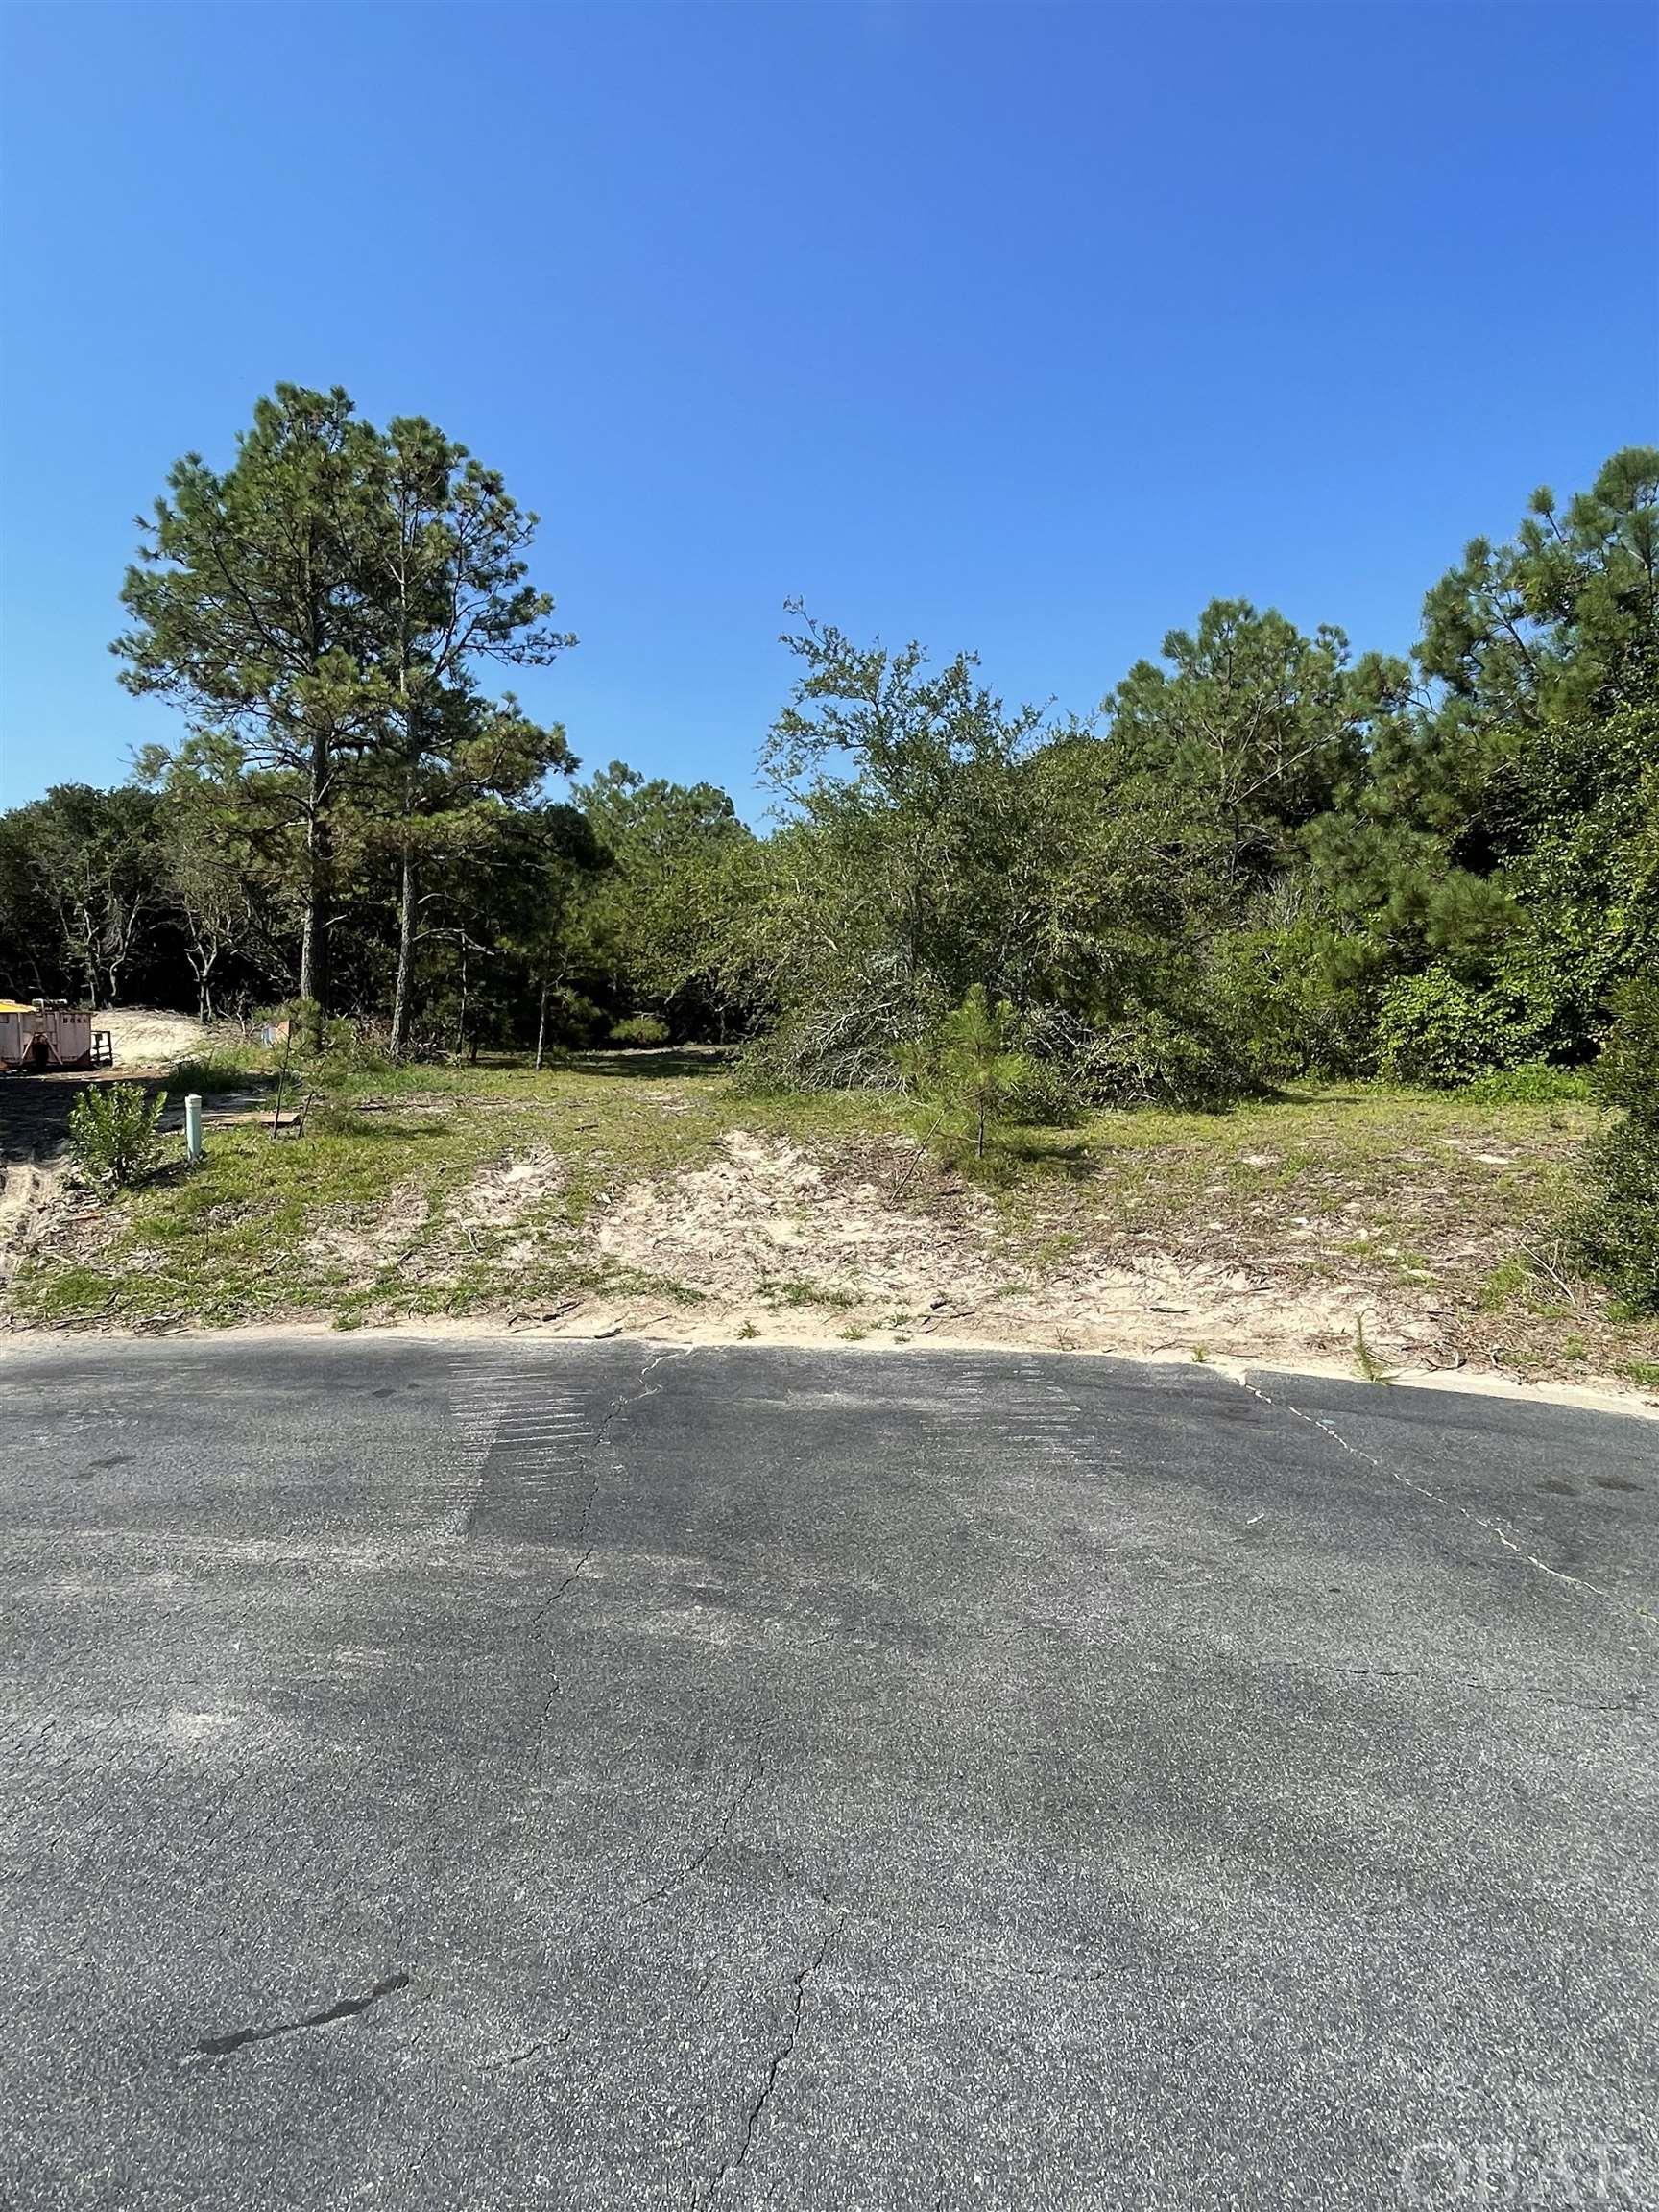 This is a high lot fully accessible from the Grouse Court Cul d' Sac. Prospects with Agent will have no trouble walking the lot. X FLOOD ZONE NO FLOOD INSURANCE NECESSARY . Very few home sites on this Court. Located close to the North End Pool One of Three on site. Children playground. CURRITUCK Clubhouse, THREE COMMUNITY POOLS, one a short walk for the family. Located in this TOP QUALITY GOLF COURSE. Plenty  of Walking and Bike Paths with Little vehicle traffic. Great place to build your retreat.  NOT MANY LOTS LEFT IN CURRITUCK. FREE BUS RIDE TO THE BEACH ALL SUMMER LONG. LARGE PRIVATE HIGH LOT.